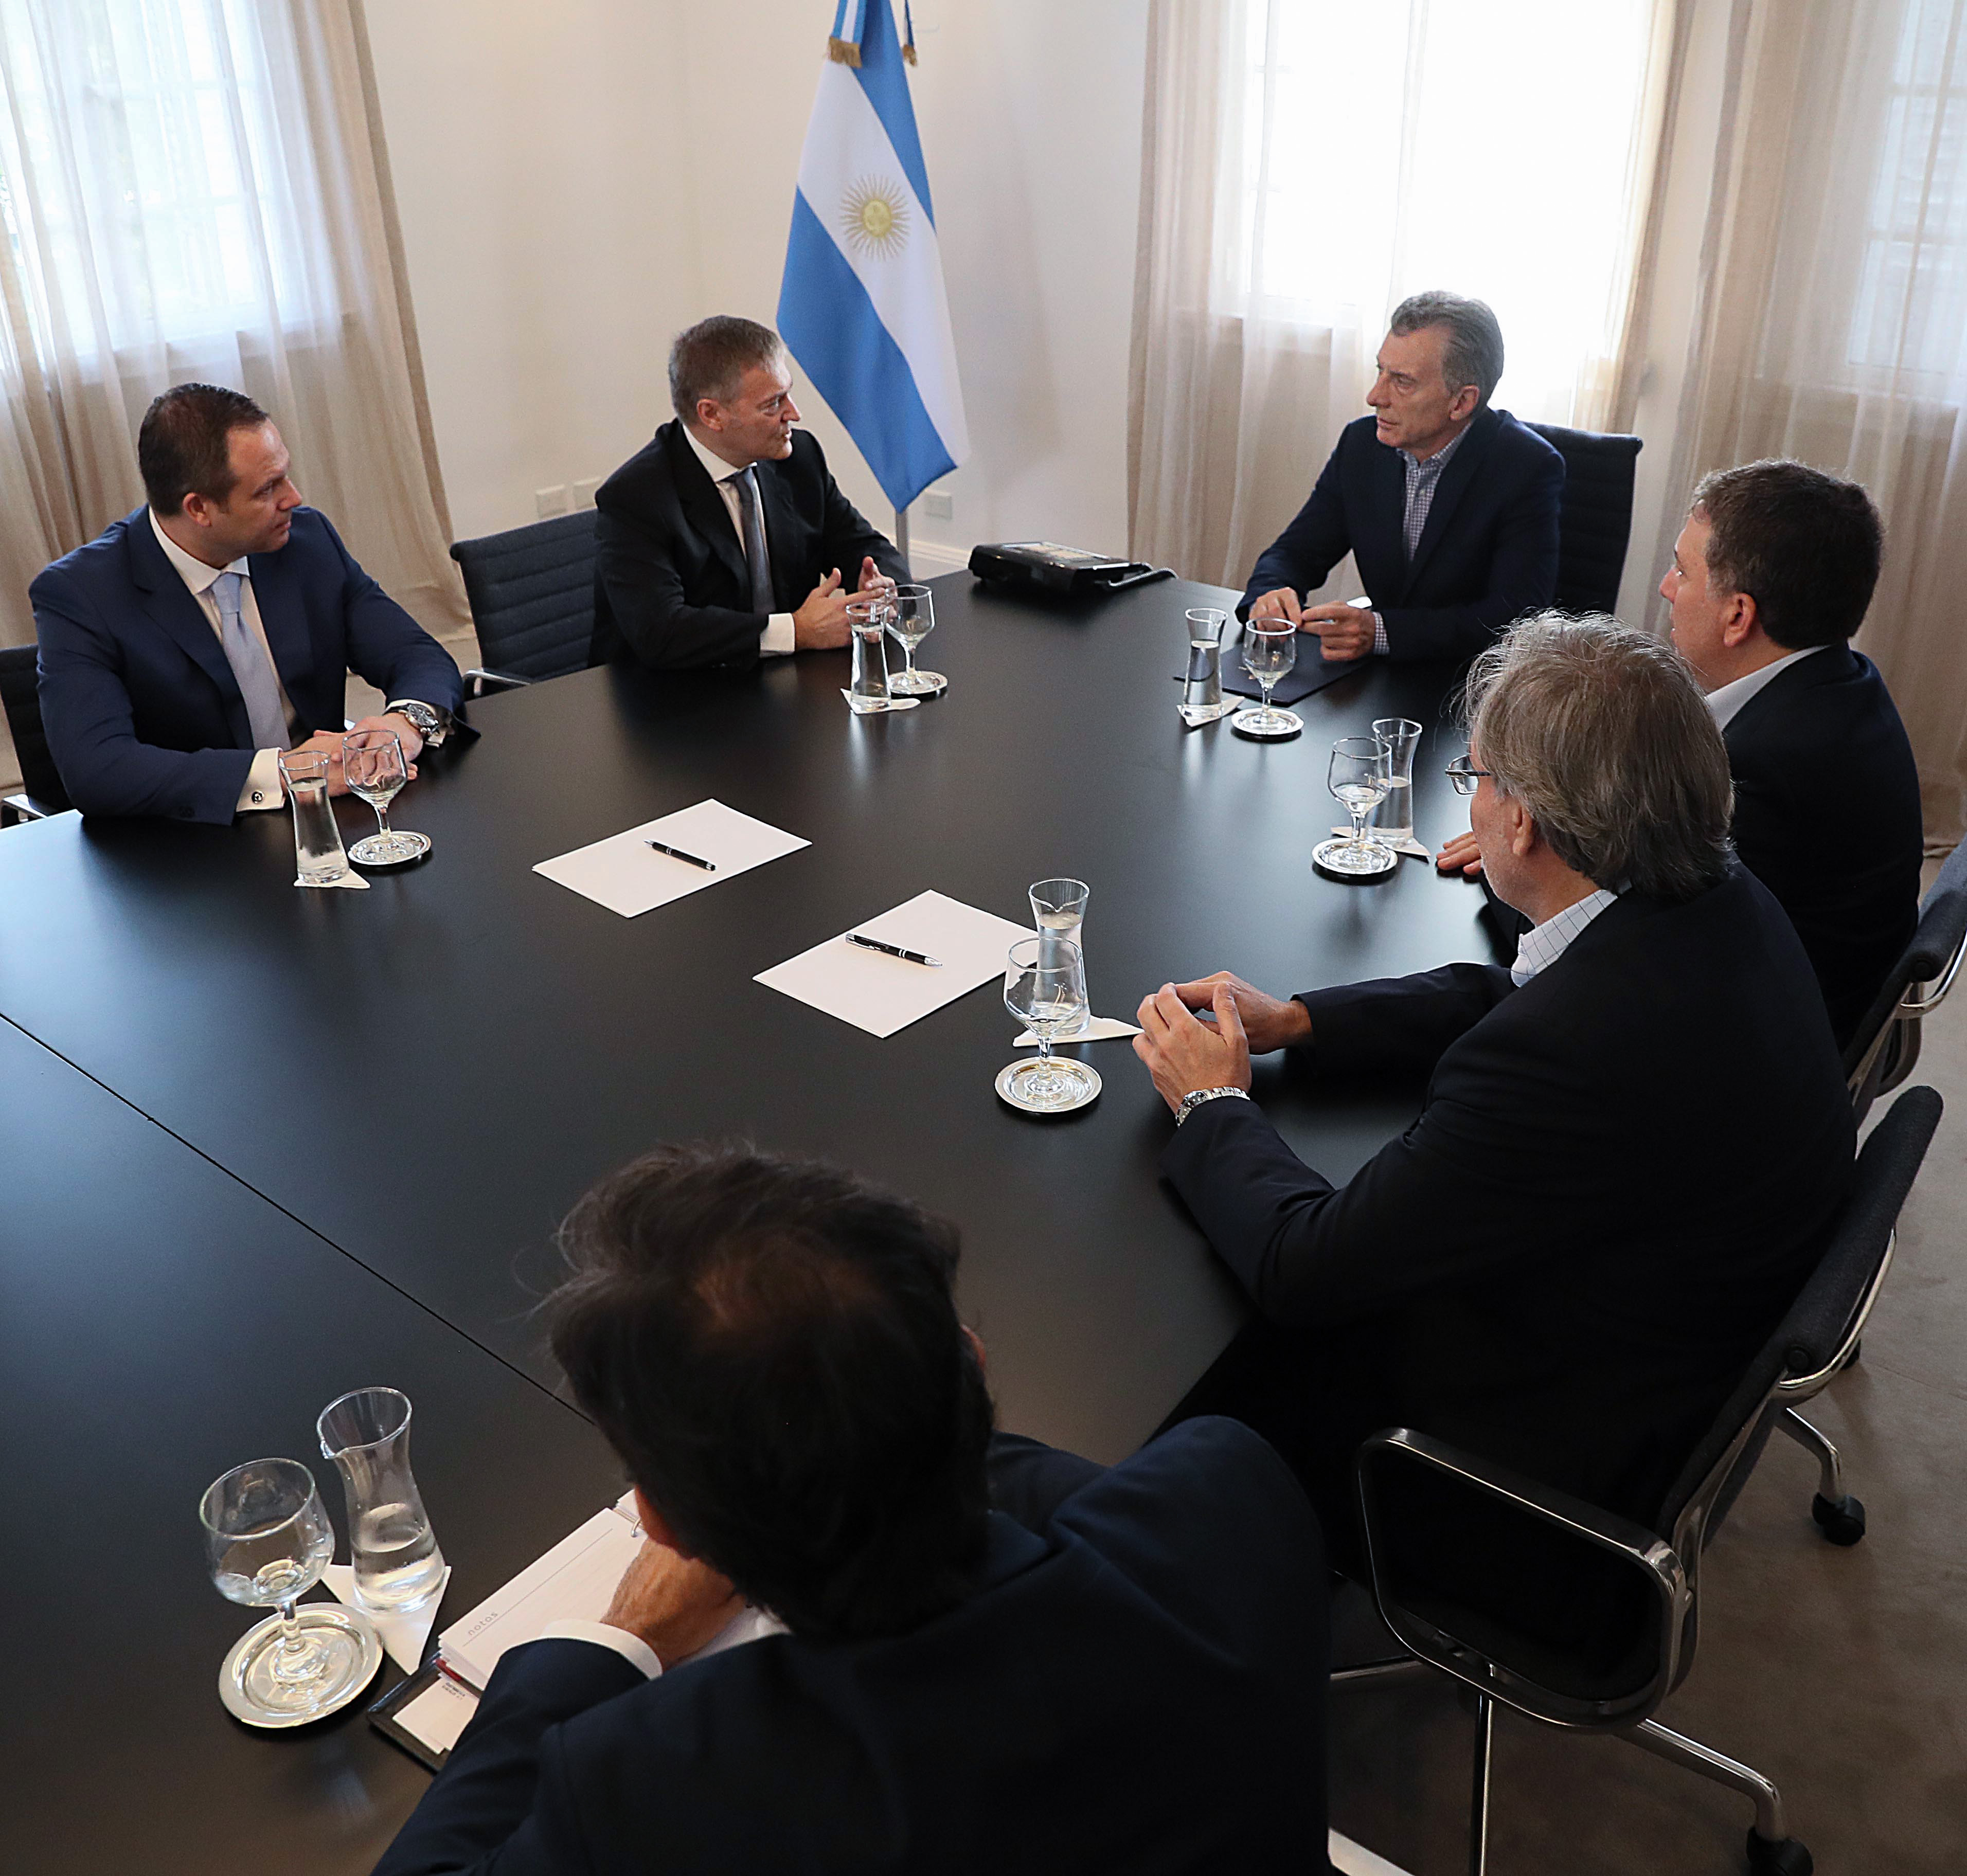 International mining companies present project to President Macri to extract gold and copper in Argentina’s Catamarca province